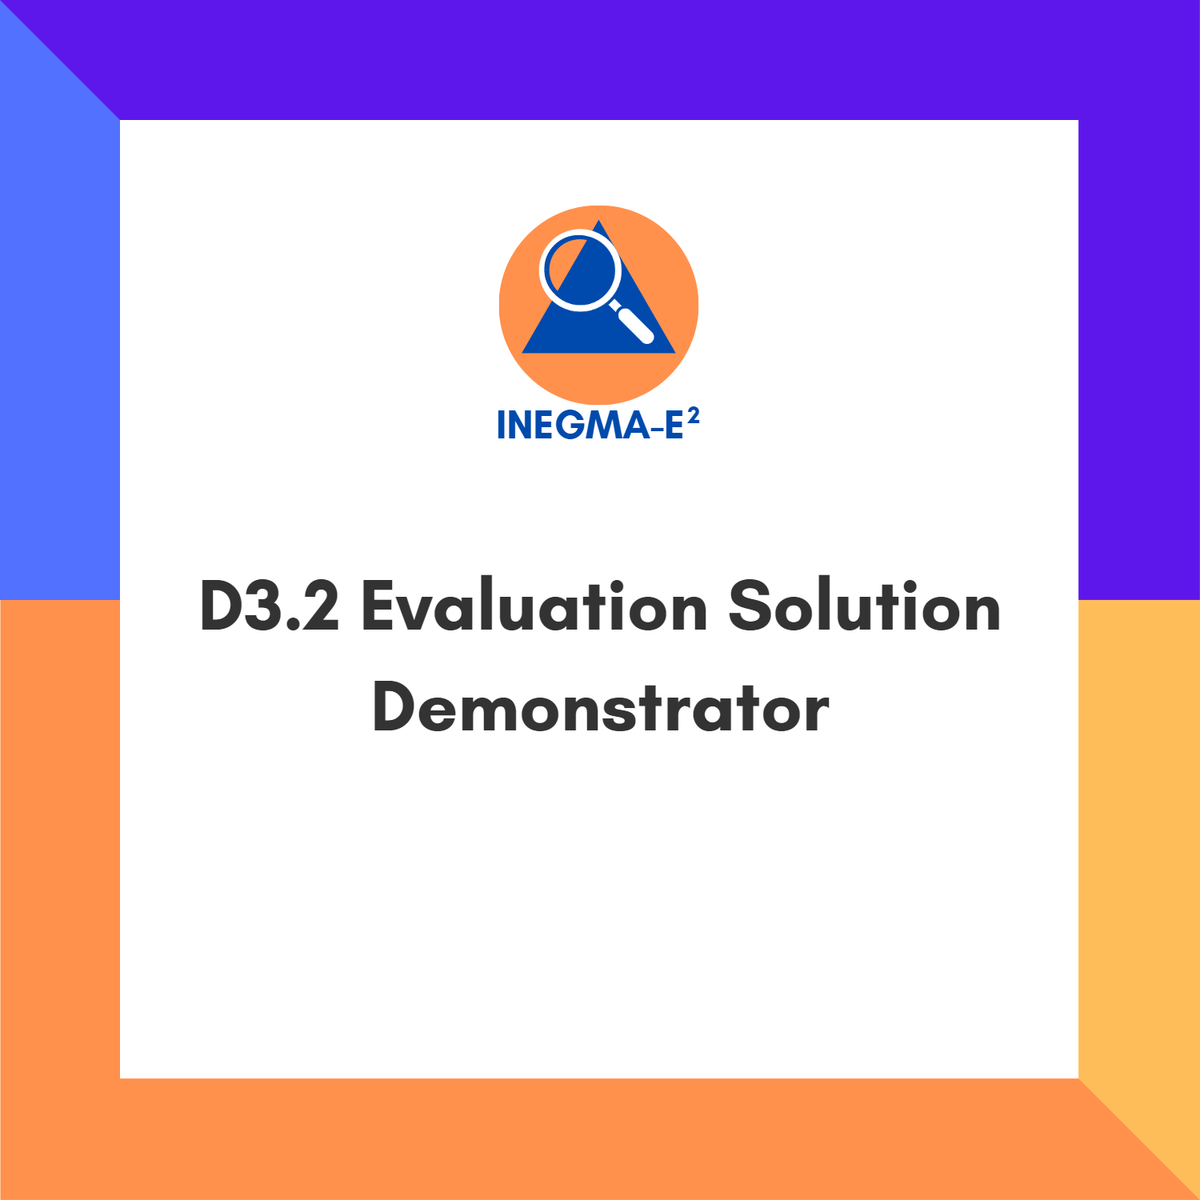 We are happy to announce that the solution developed within our #EUproject - the demonstrator, INEGMA-E2 deliverable D3.2  - was tested during the Host Nation Support exercise in Moldova on Feb 22-24.

Learn more here 👉 …rotection-knowledge-network.europa.eu/news/d32-evalu…

#drr #drm #civilprotection